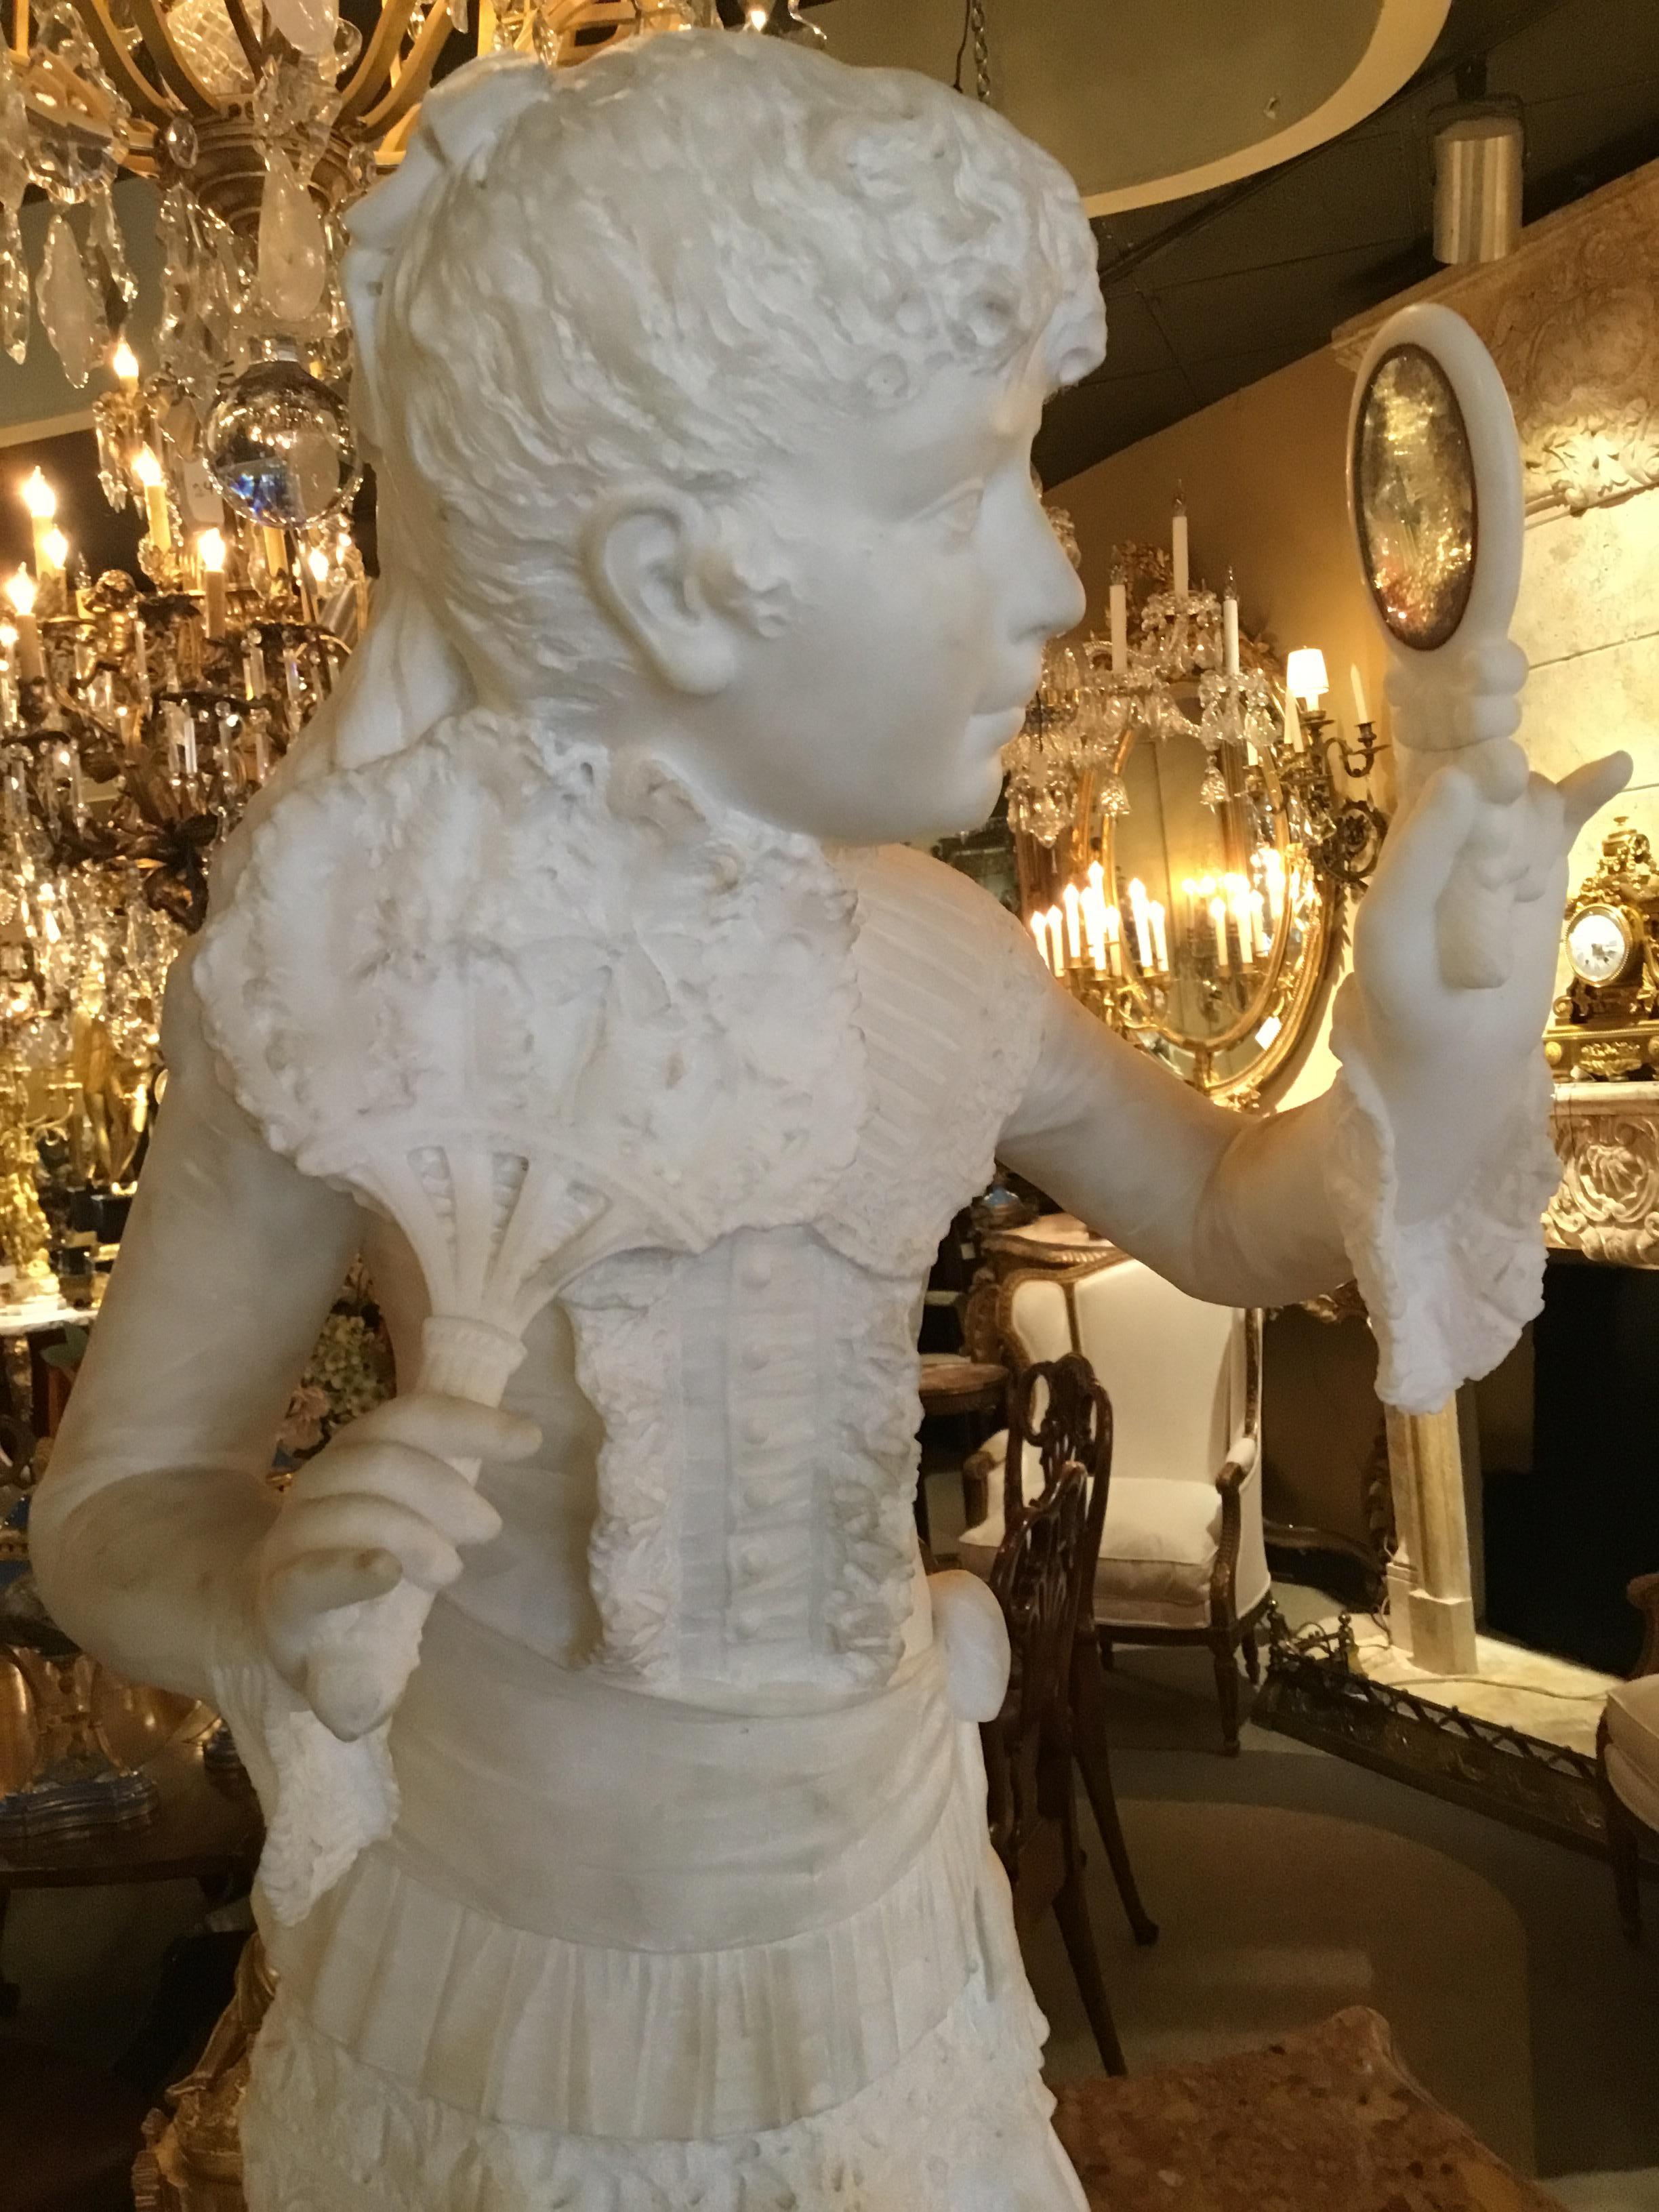 Hand-Carved Marble Statue of a Young Girl, circa 1870, Italian